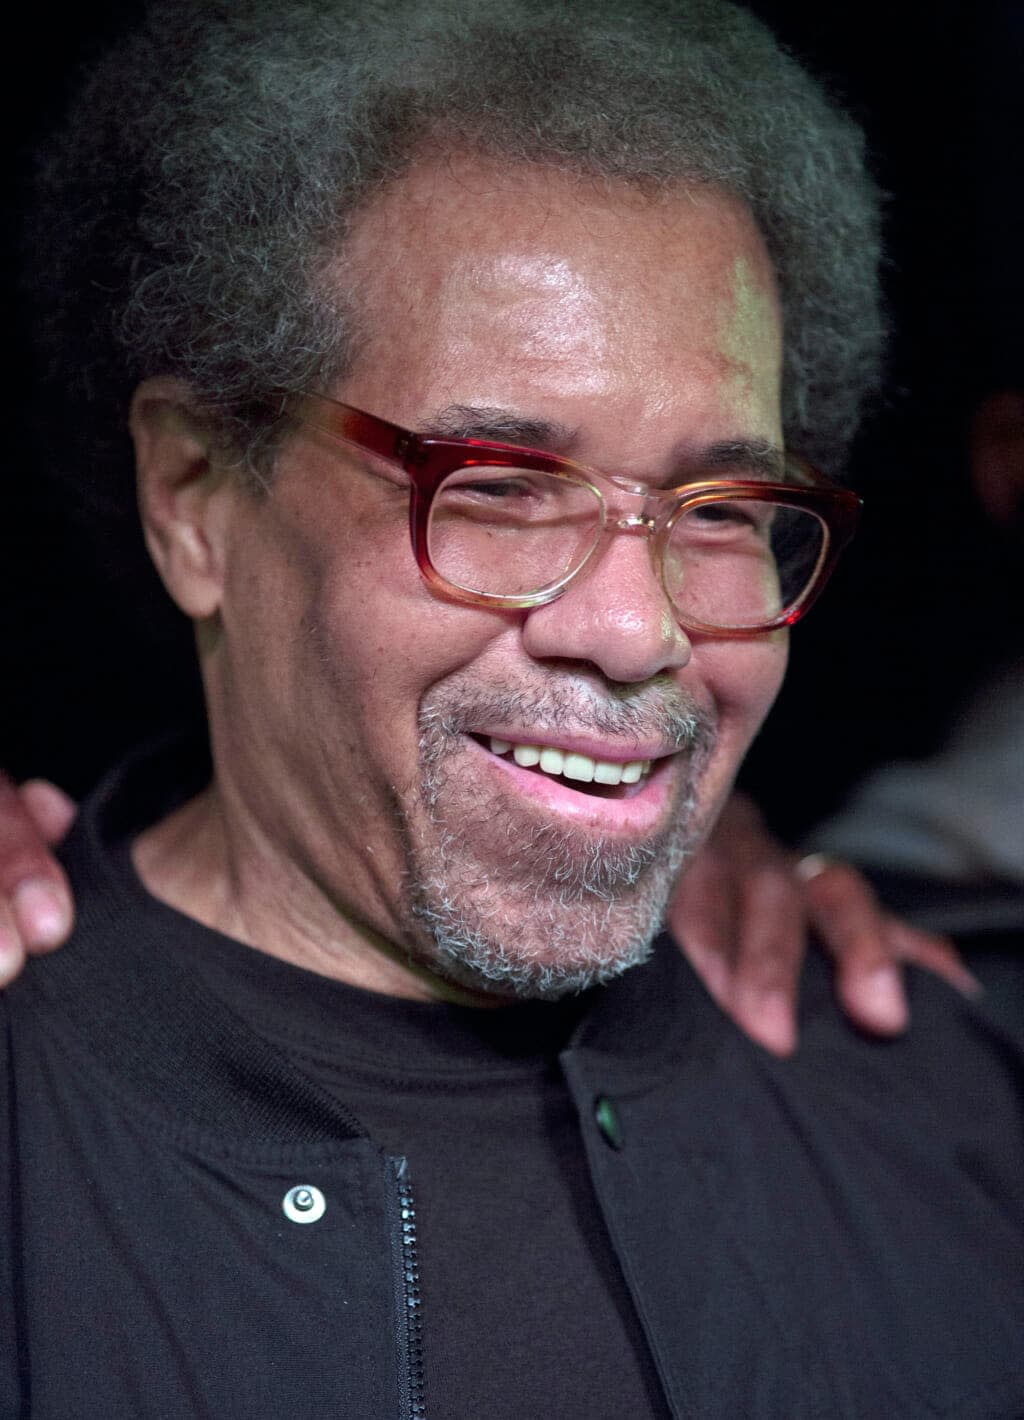 Albert Woodfox smiles as he arrives on stage during his first public appearance at the Ashe Cultural Arts Center in New Orleans, Friday, Feb. 19, 2016, after his release from Louisiana State Penitentiary in Angola, La., earlier in the day. (AP Photo/Max Becherer, File)